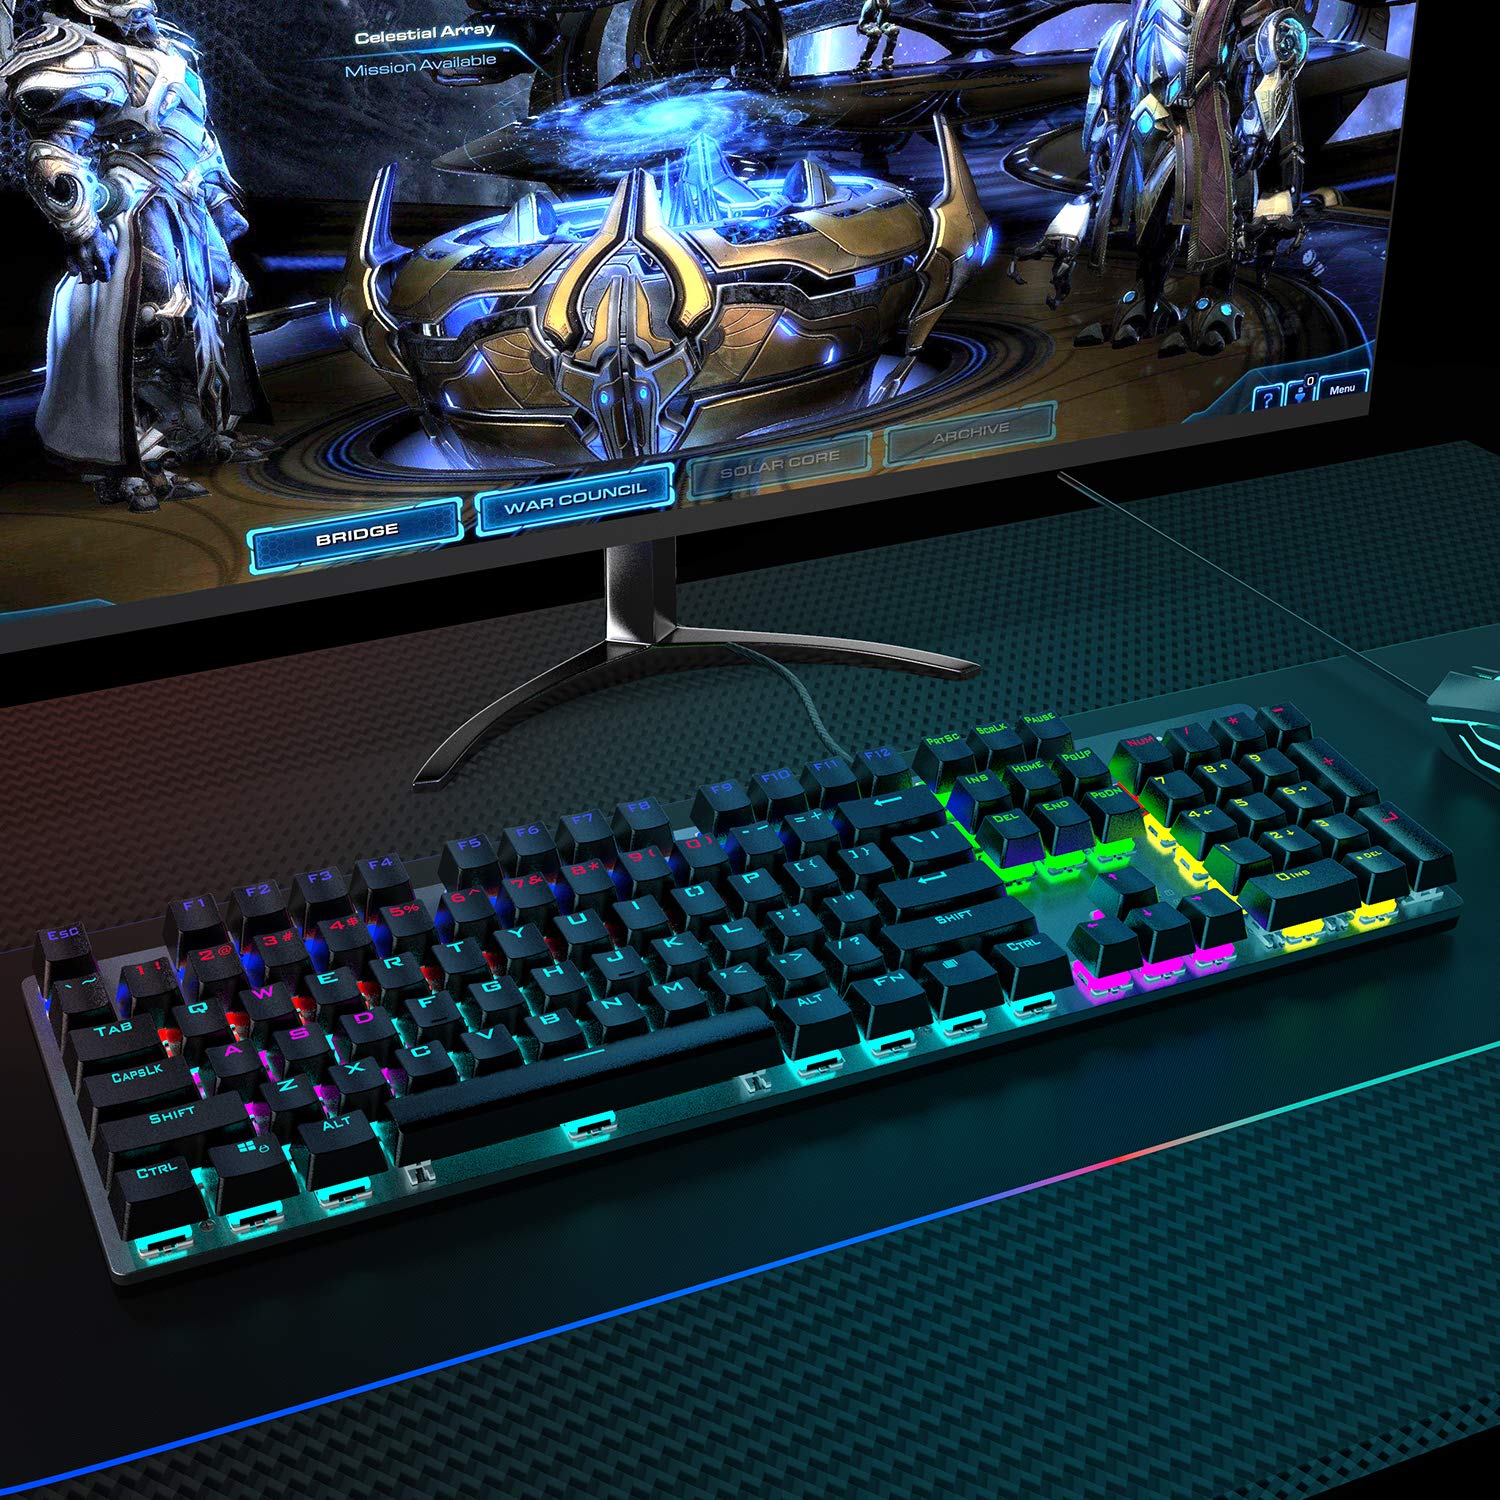 Fiodio Mechanical Gaming Keyboard, Fantastic LED Rainbow Backlit Wired Keyboard, Full Anti-Ghosting Keys, with Quick-Response Blue Switches and Multimedia Control for PC and Desktop Computer